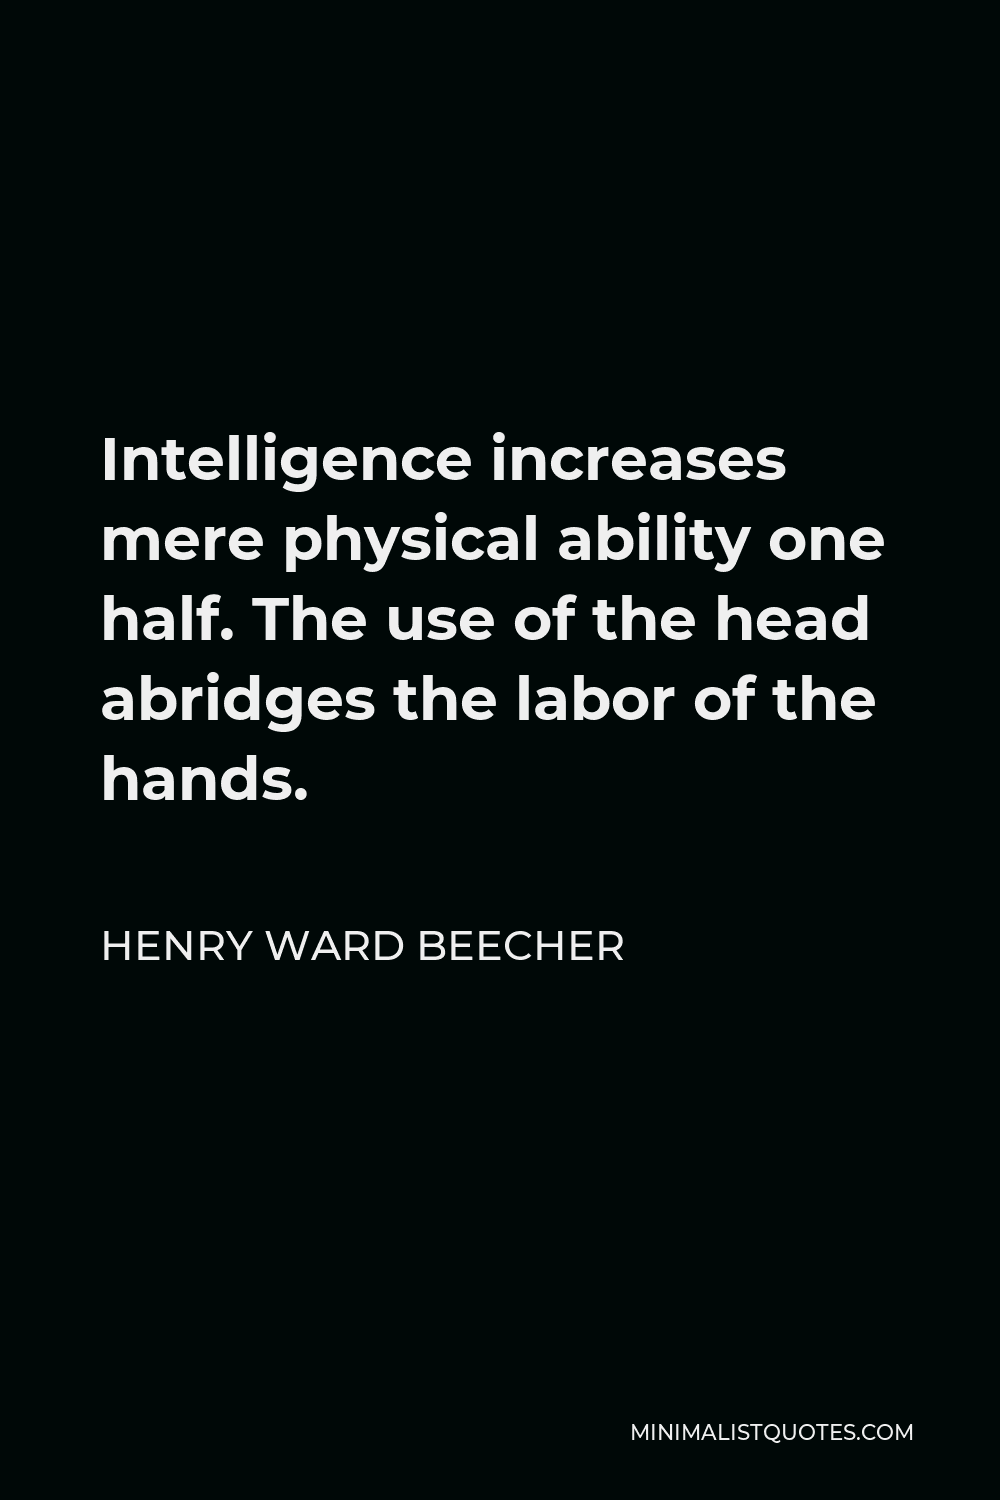 Henry Ward Beecher Quote - Intelligence increases mere physical ability one half. The use of the head abridges the labor of the hands.